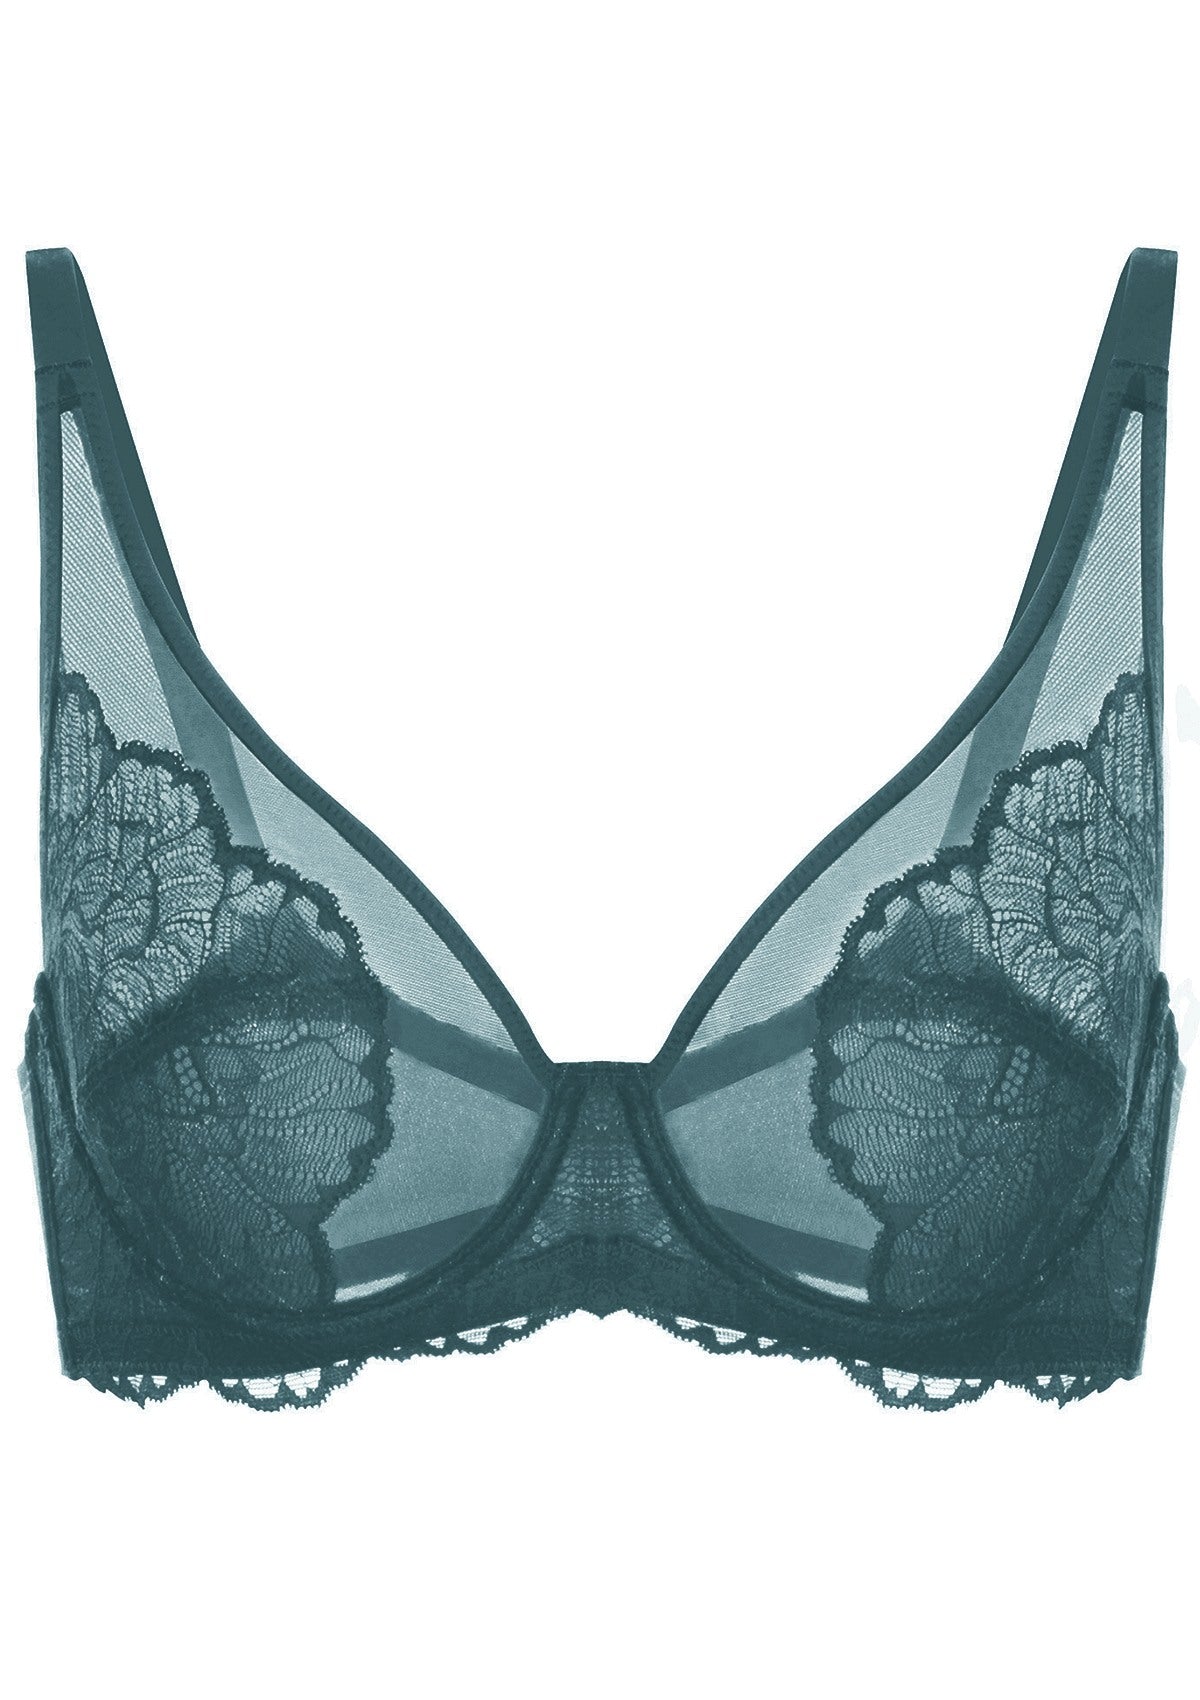 HSIA Blossom Full Figure See-Through Lace Bra For Side And Back Fat - Balsam Blue / 34 / G